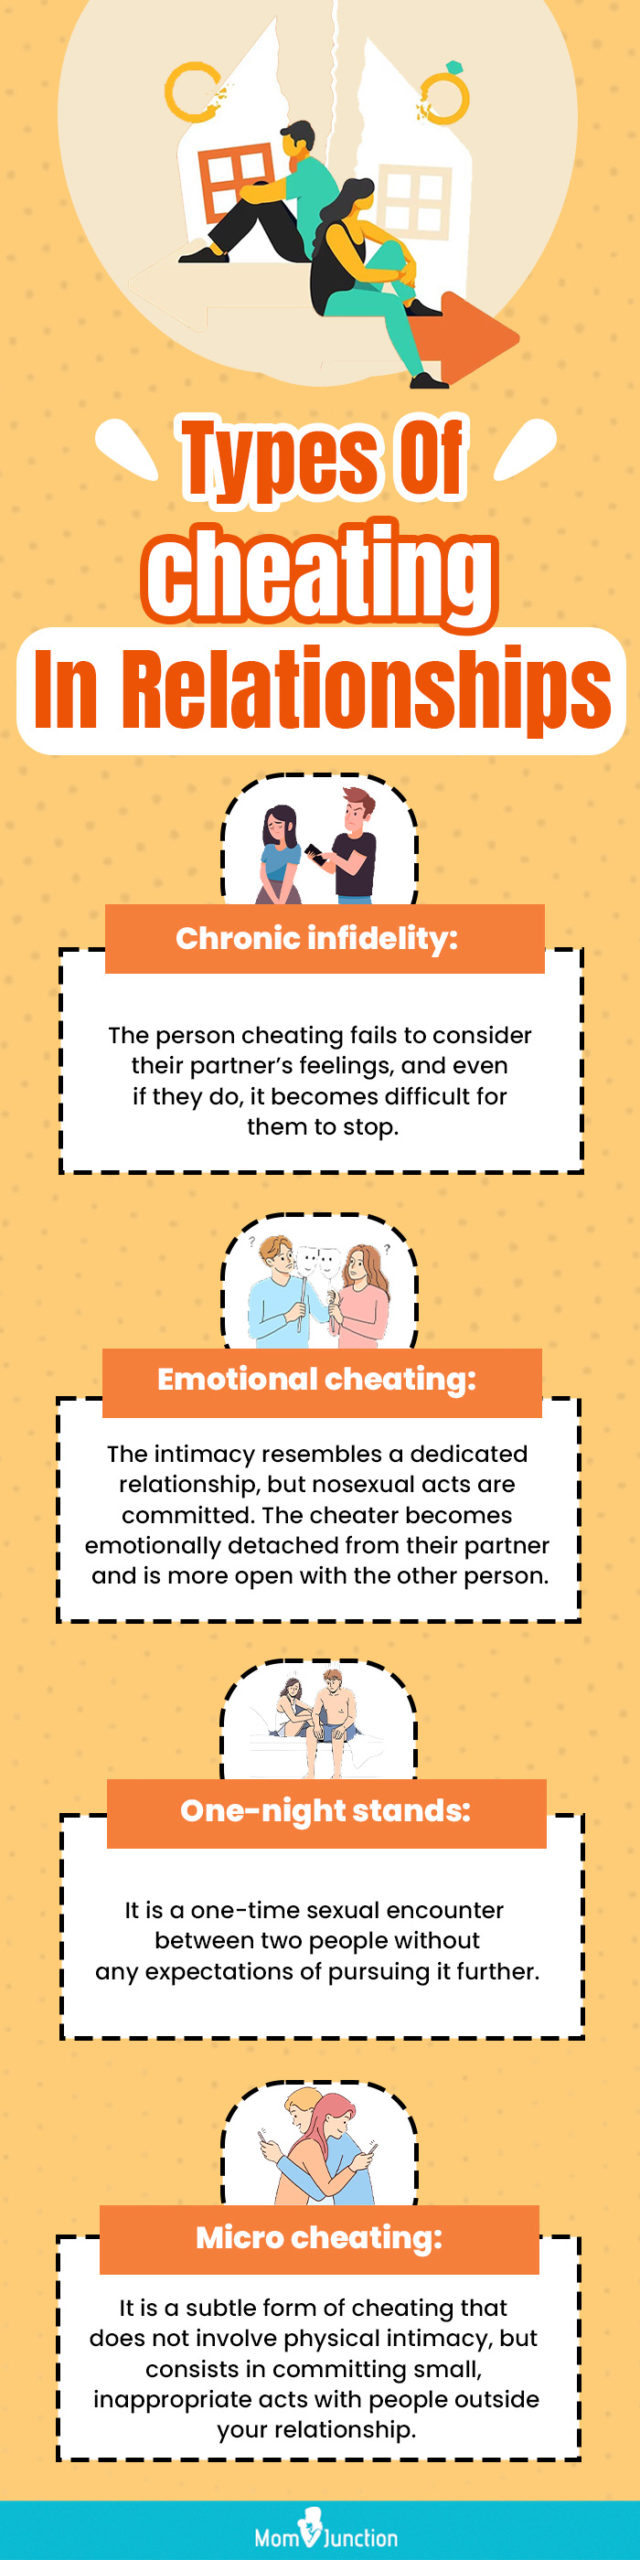 types of cheating in relationships (infographic)